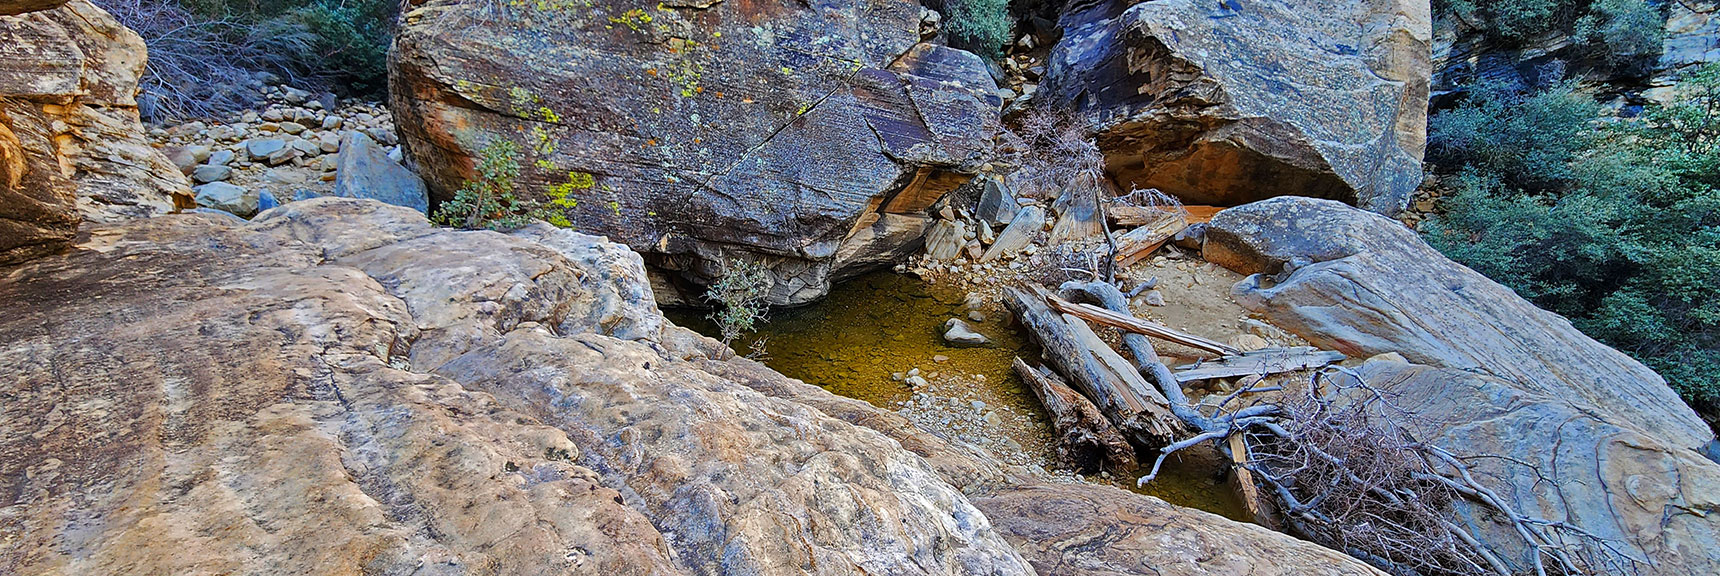 Quiet Pool Far Below Rock Ledge Which is Just Wide Enough | Ice Box Canyon | Red Rock Canyon NCA, Nevada | Las Vegas Area Trails | David Smith